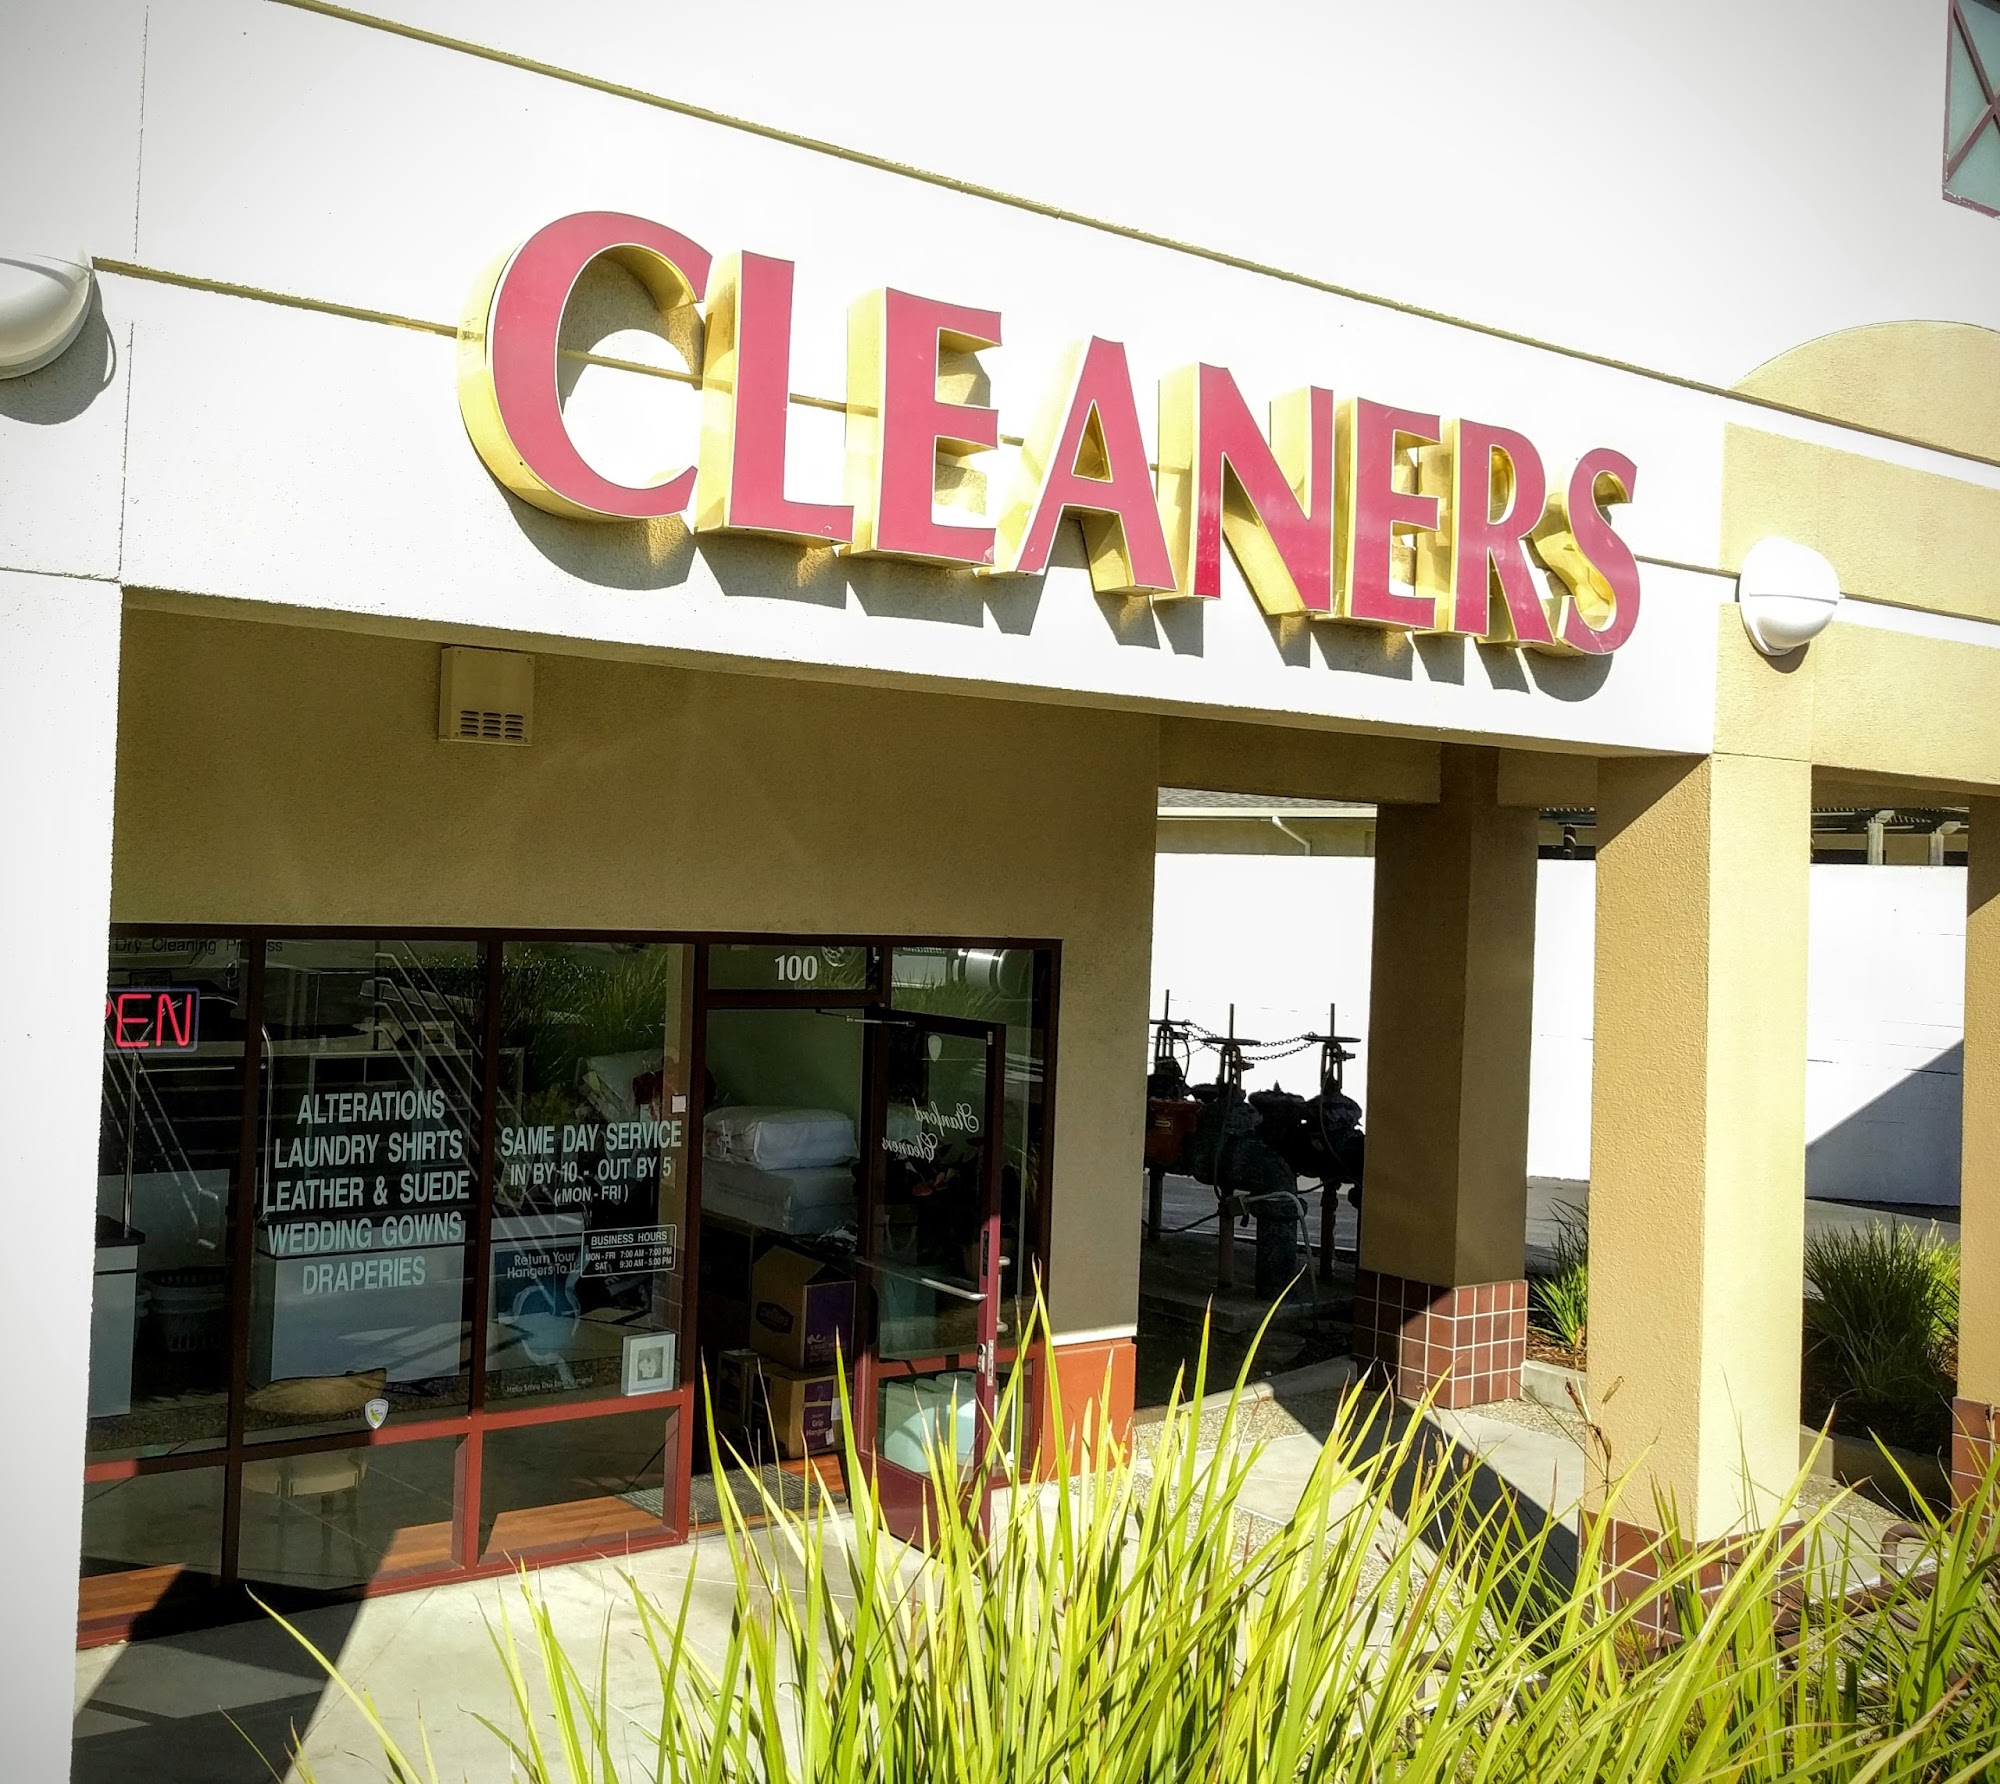 Stanford Cleaners